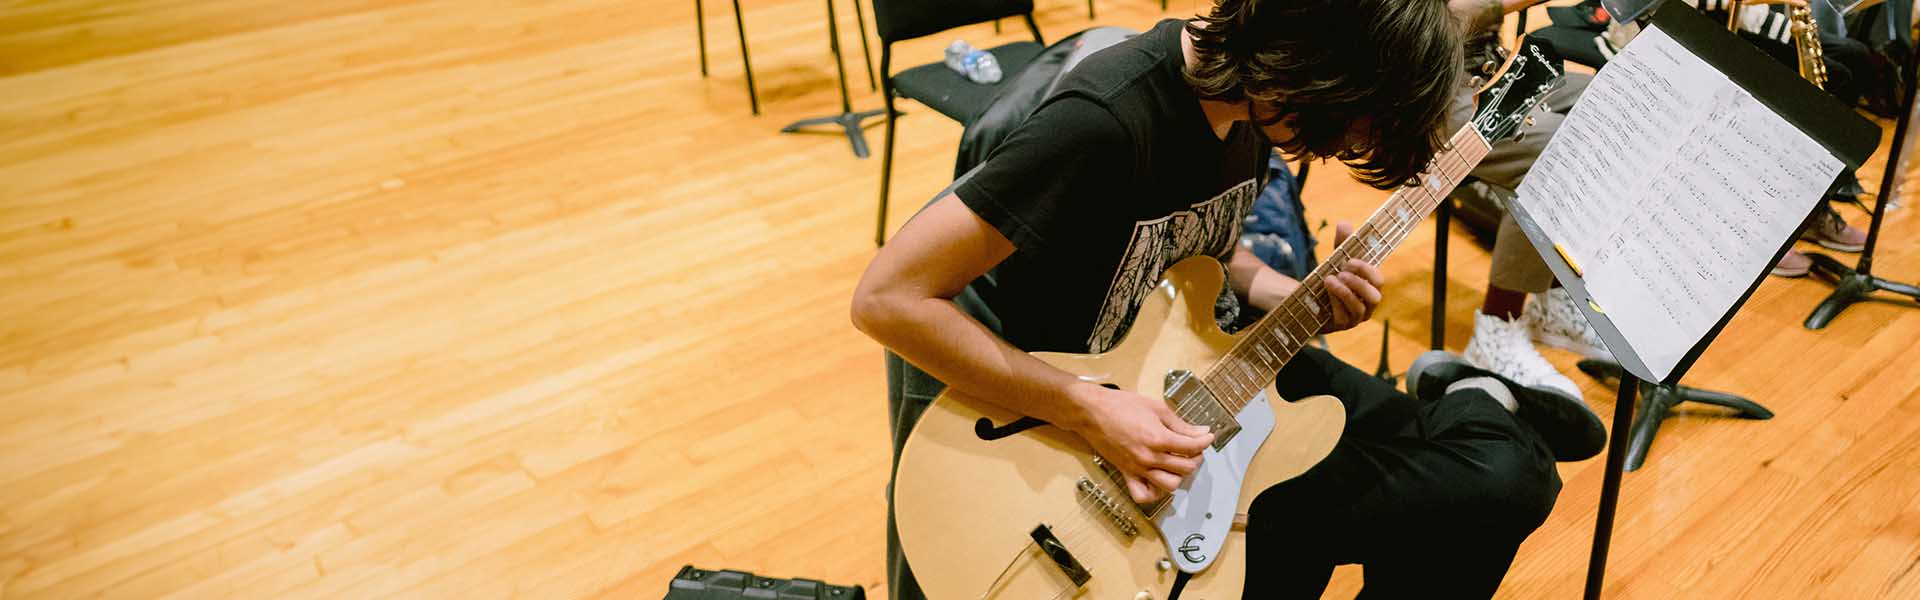 Male Music student practicing on his guitar in class